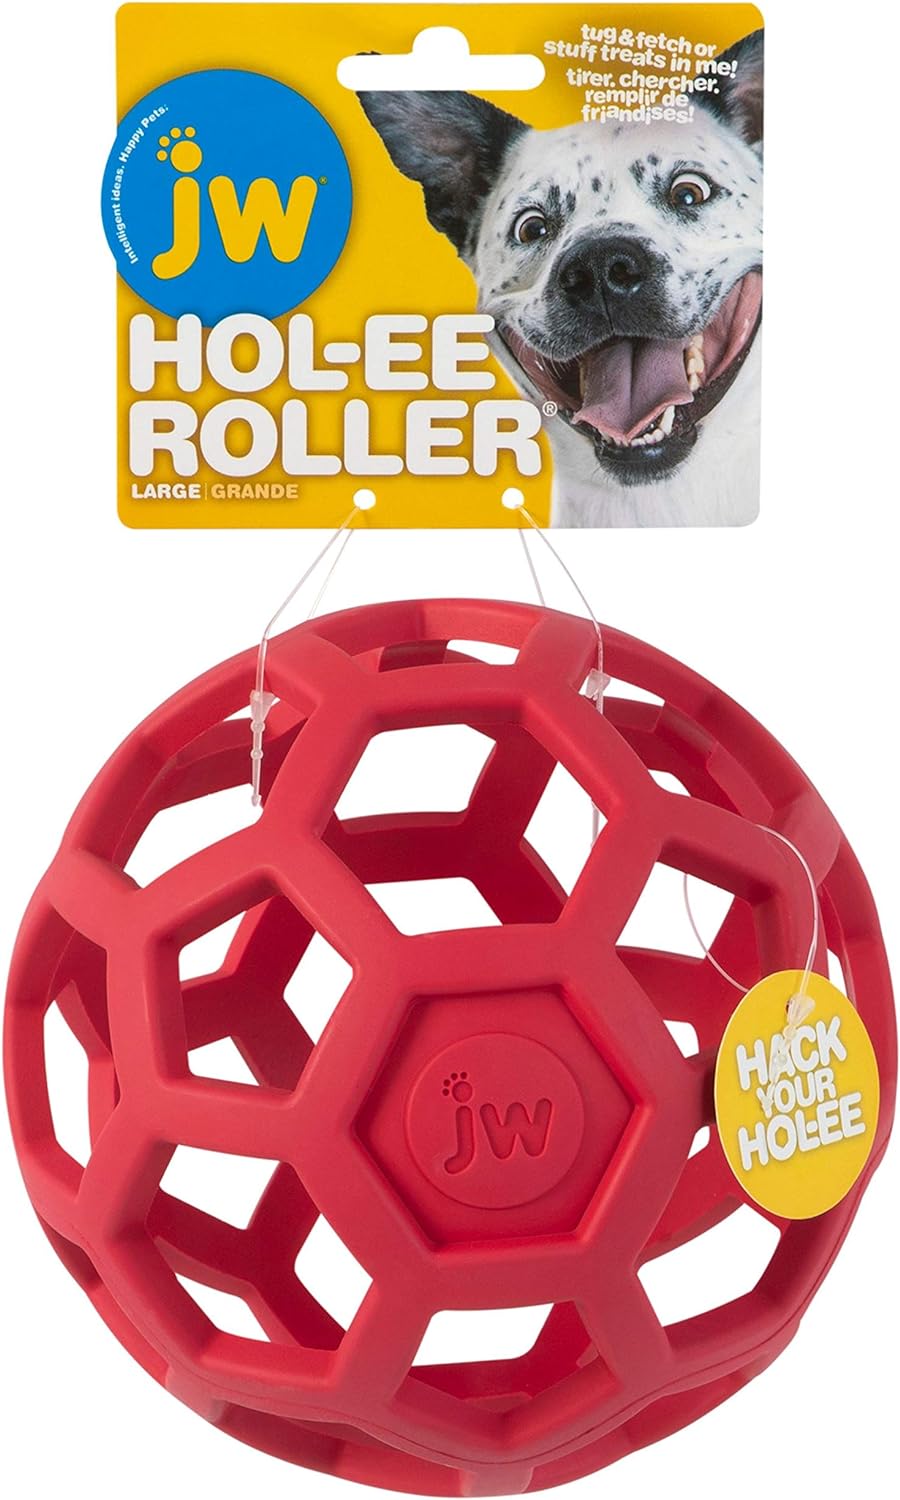 JW Pet Hol-Ee Roller Dog Toy Puzzle Ball - Large (5.5 Inch Diameter), Natural Rubber, Colors May Vary